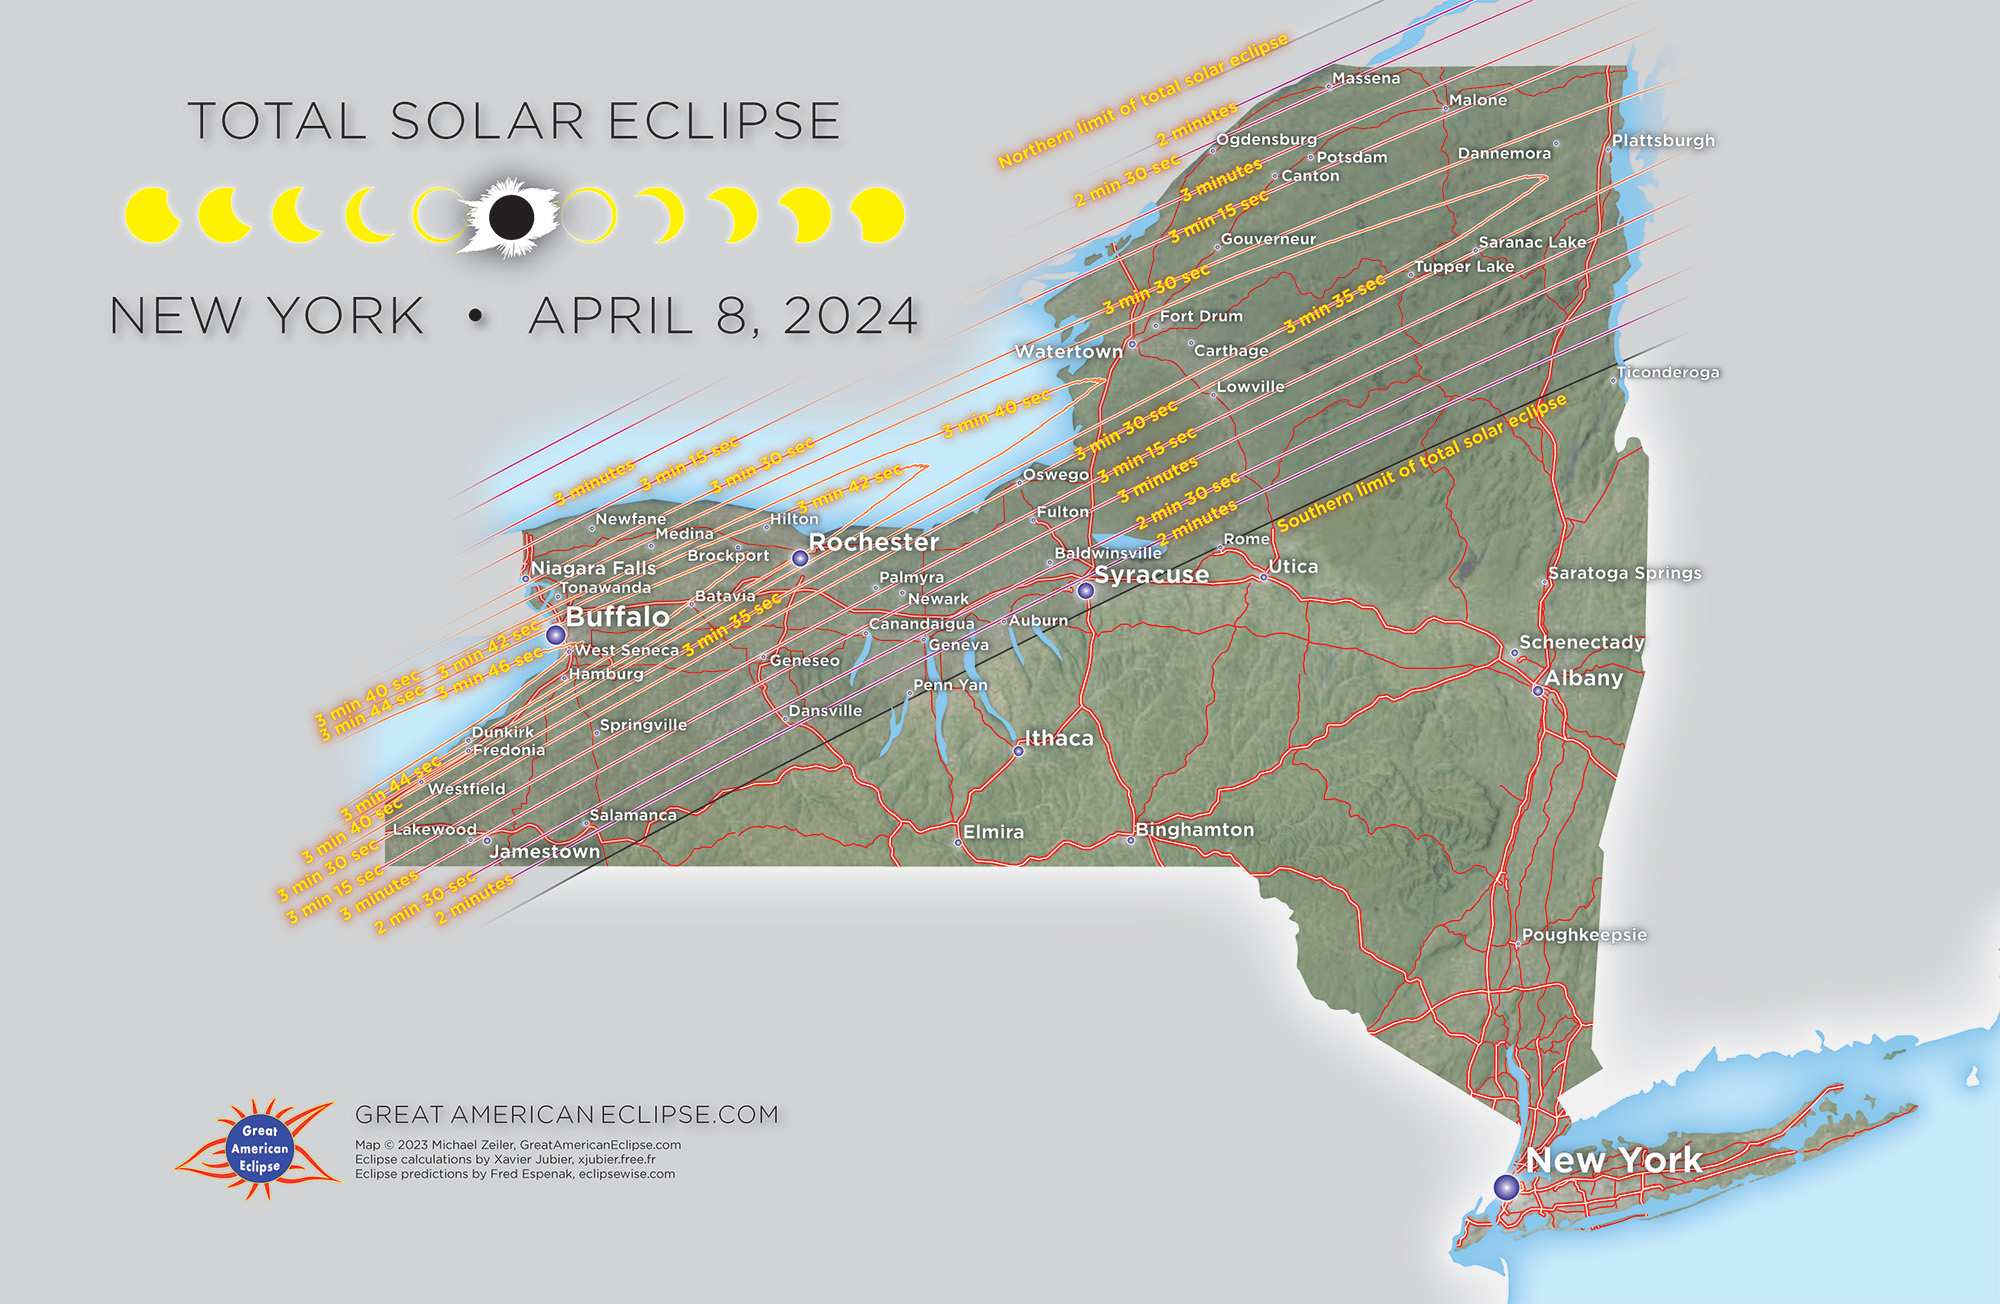 75 days until the total solar eclipse in CNY, timing the path of